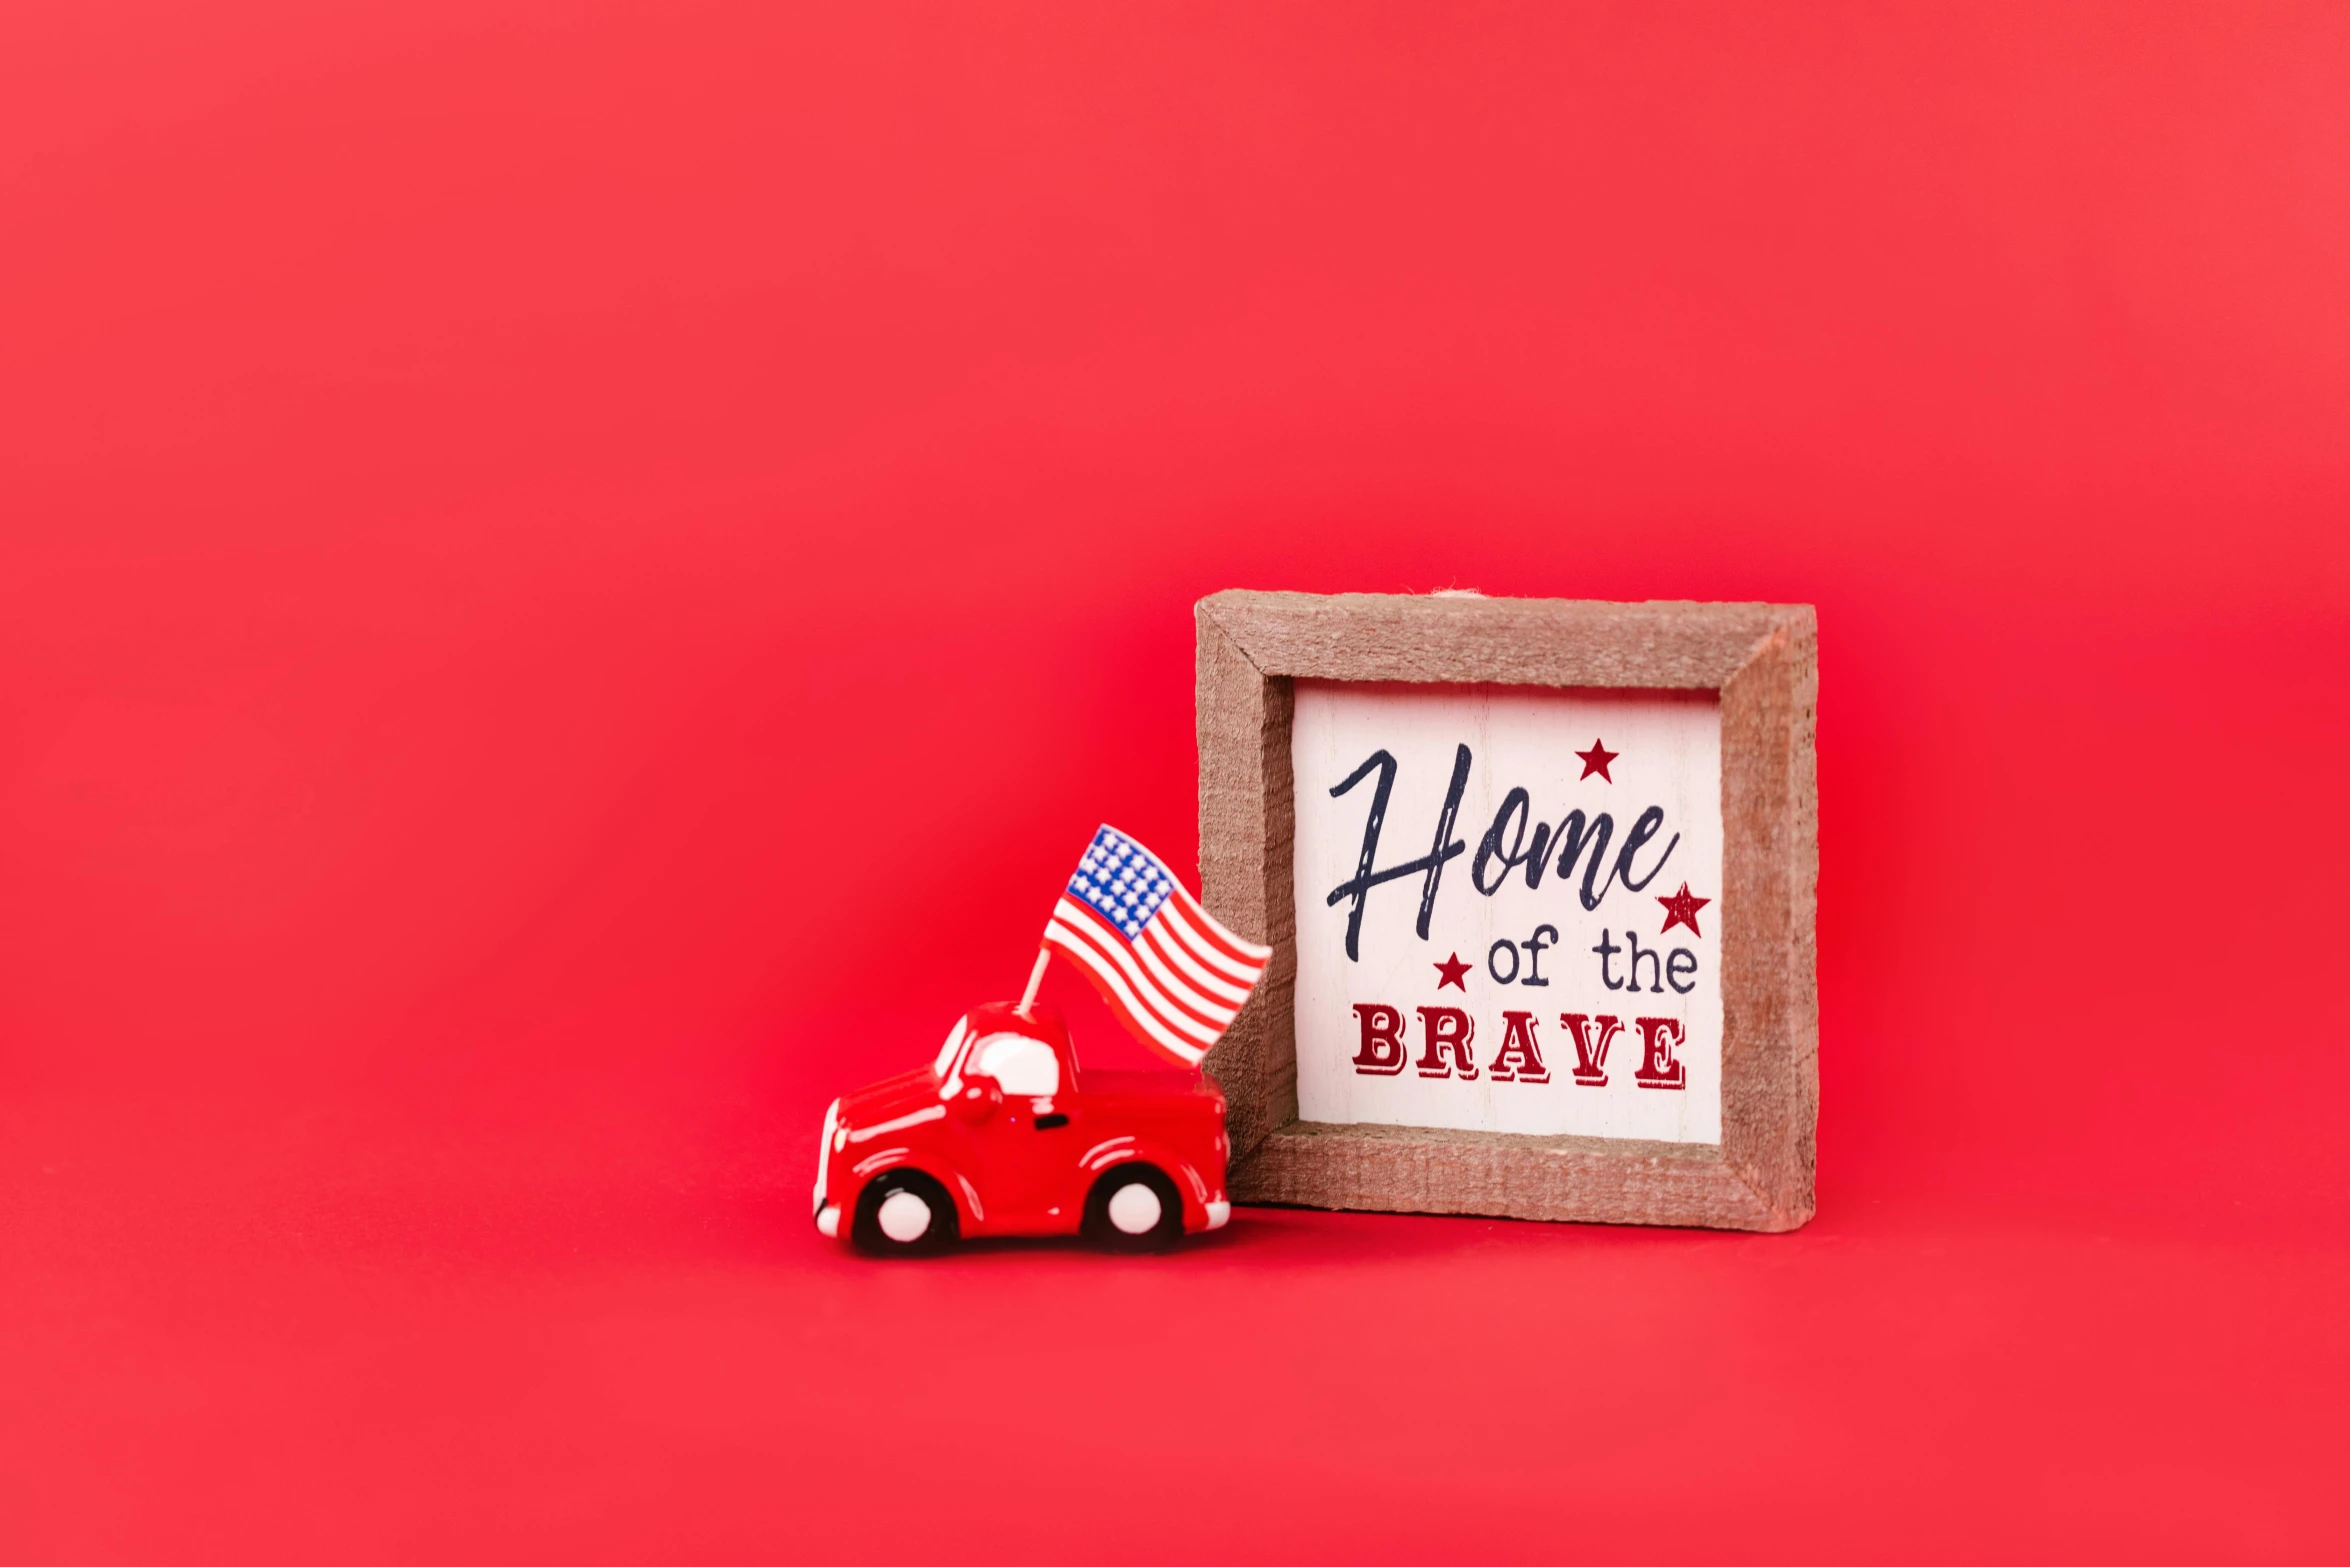 a toy car next to a sign that says home of the brave, pexels, folk art, background image, red white background, picture frames, wearing a red outfit